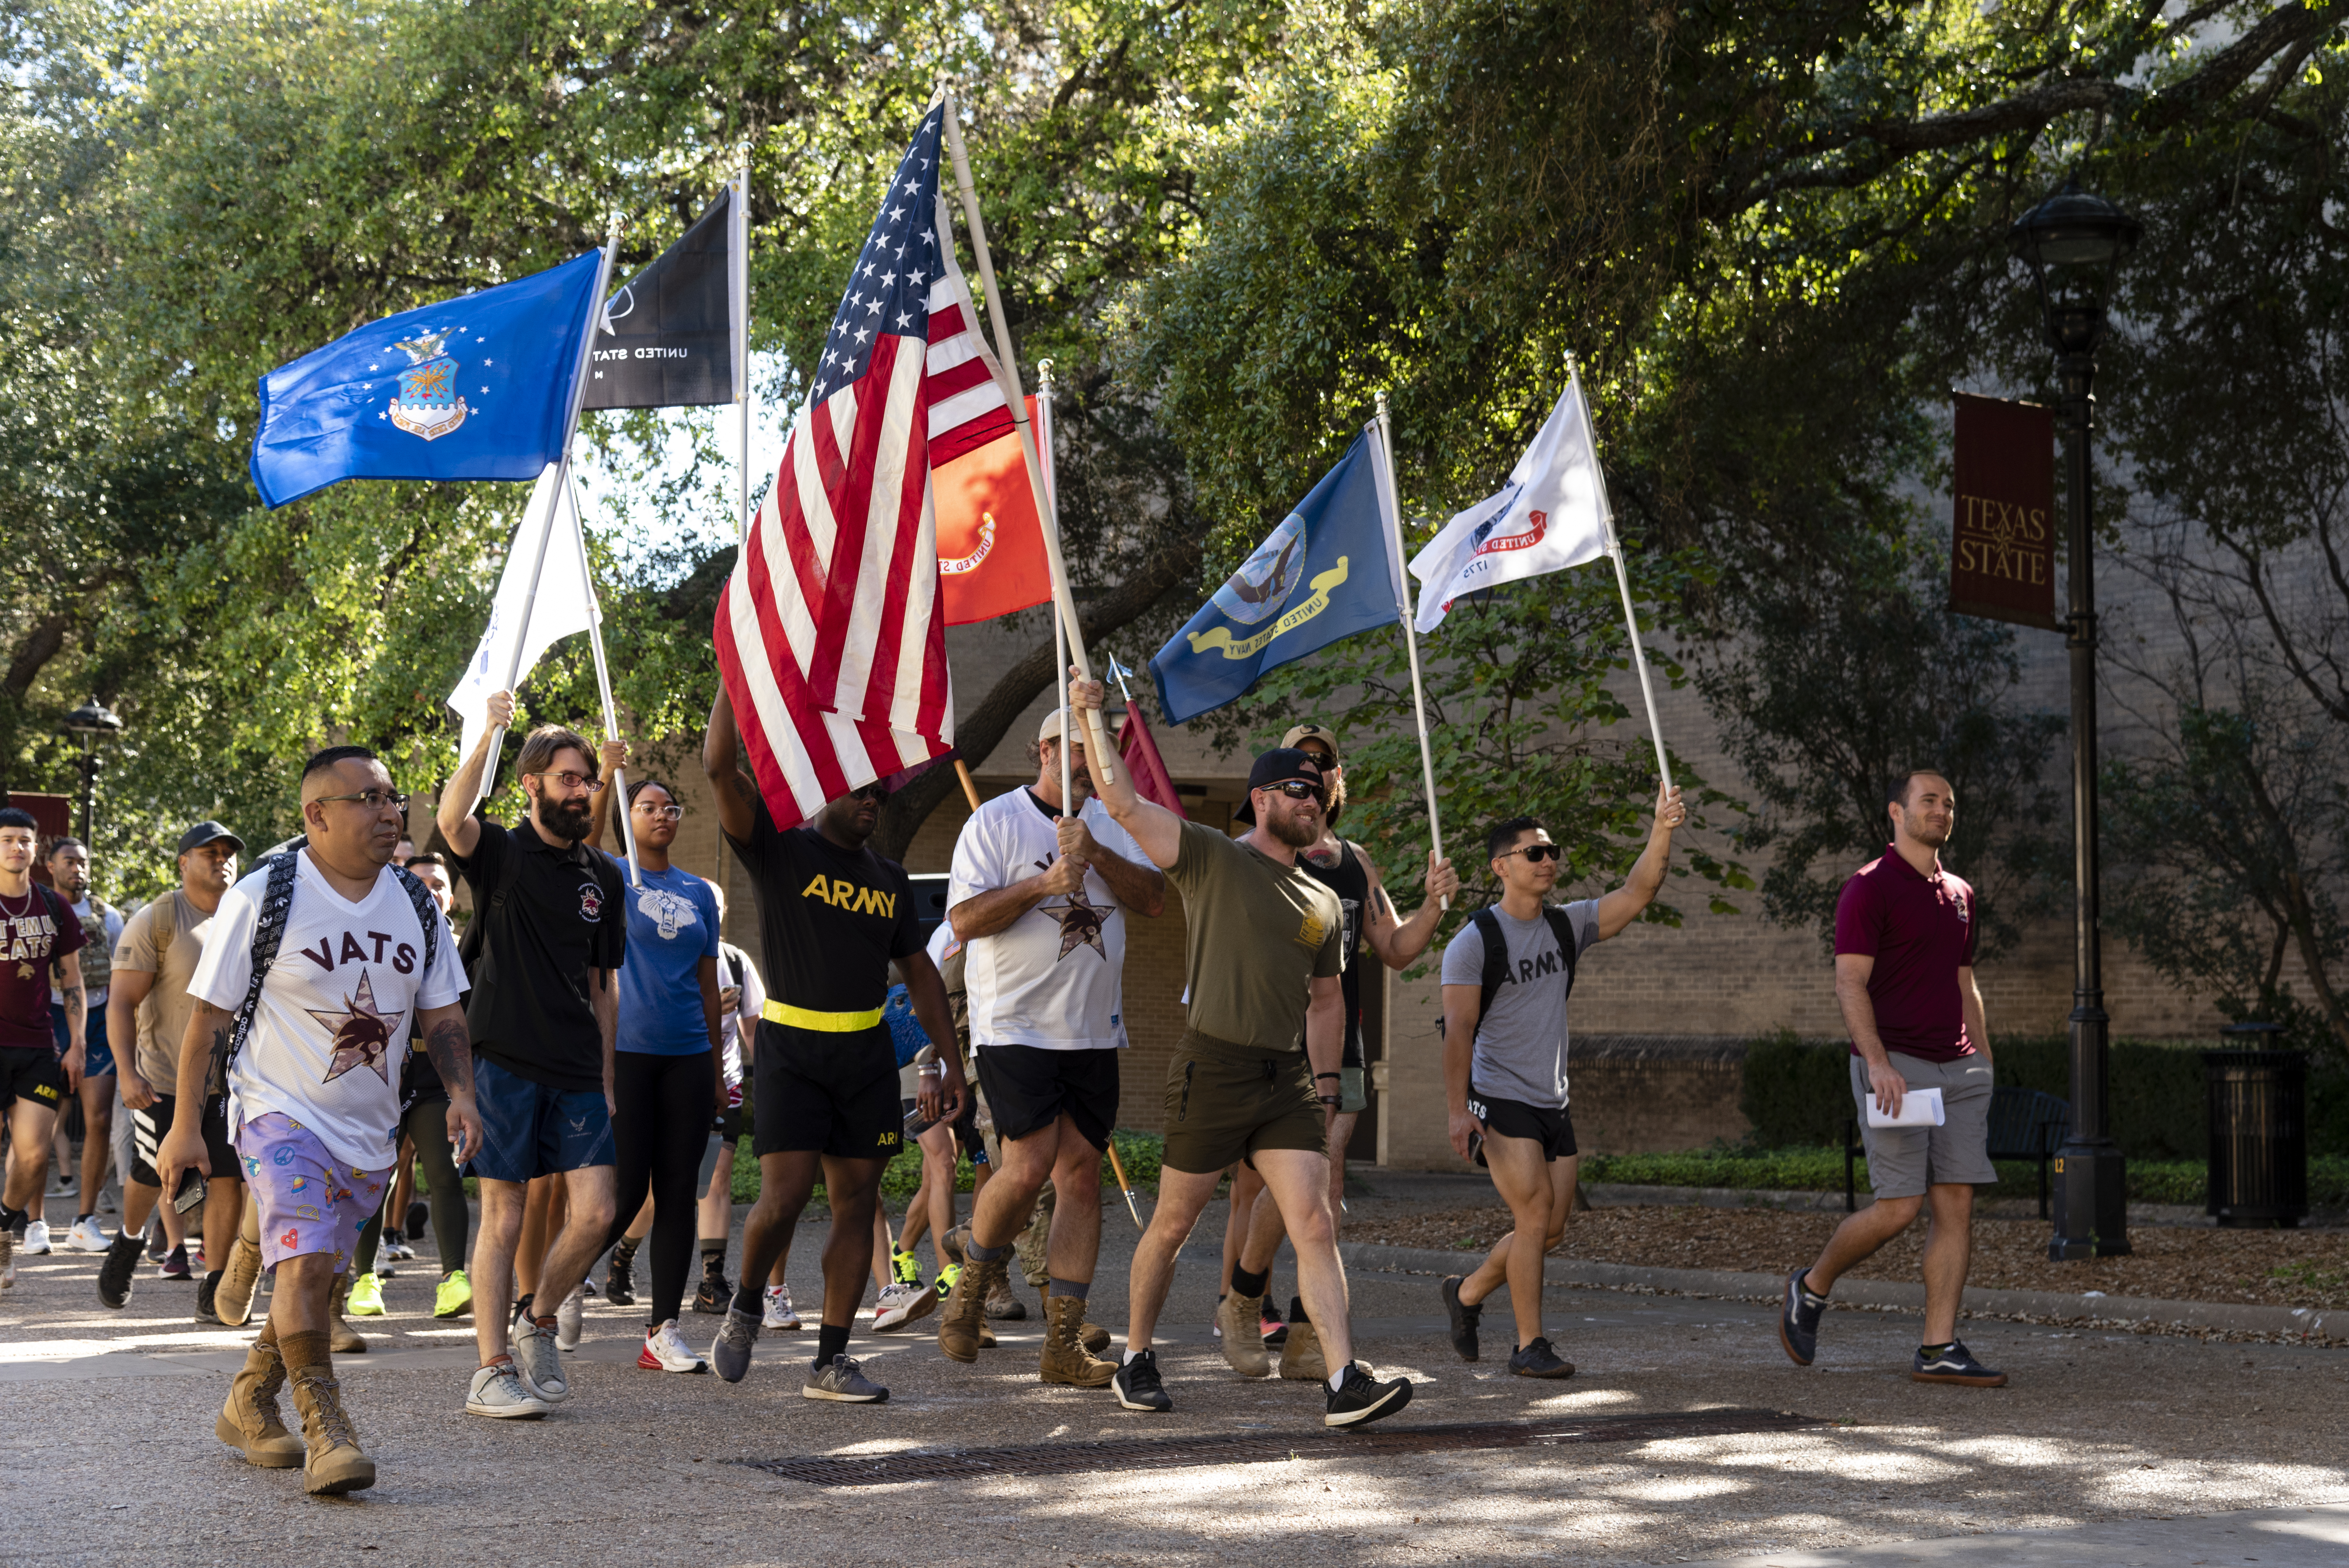 Texas State University student Veterans in plain clothes walking carring various American and American military flags.